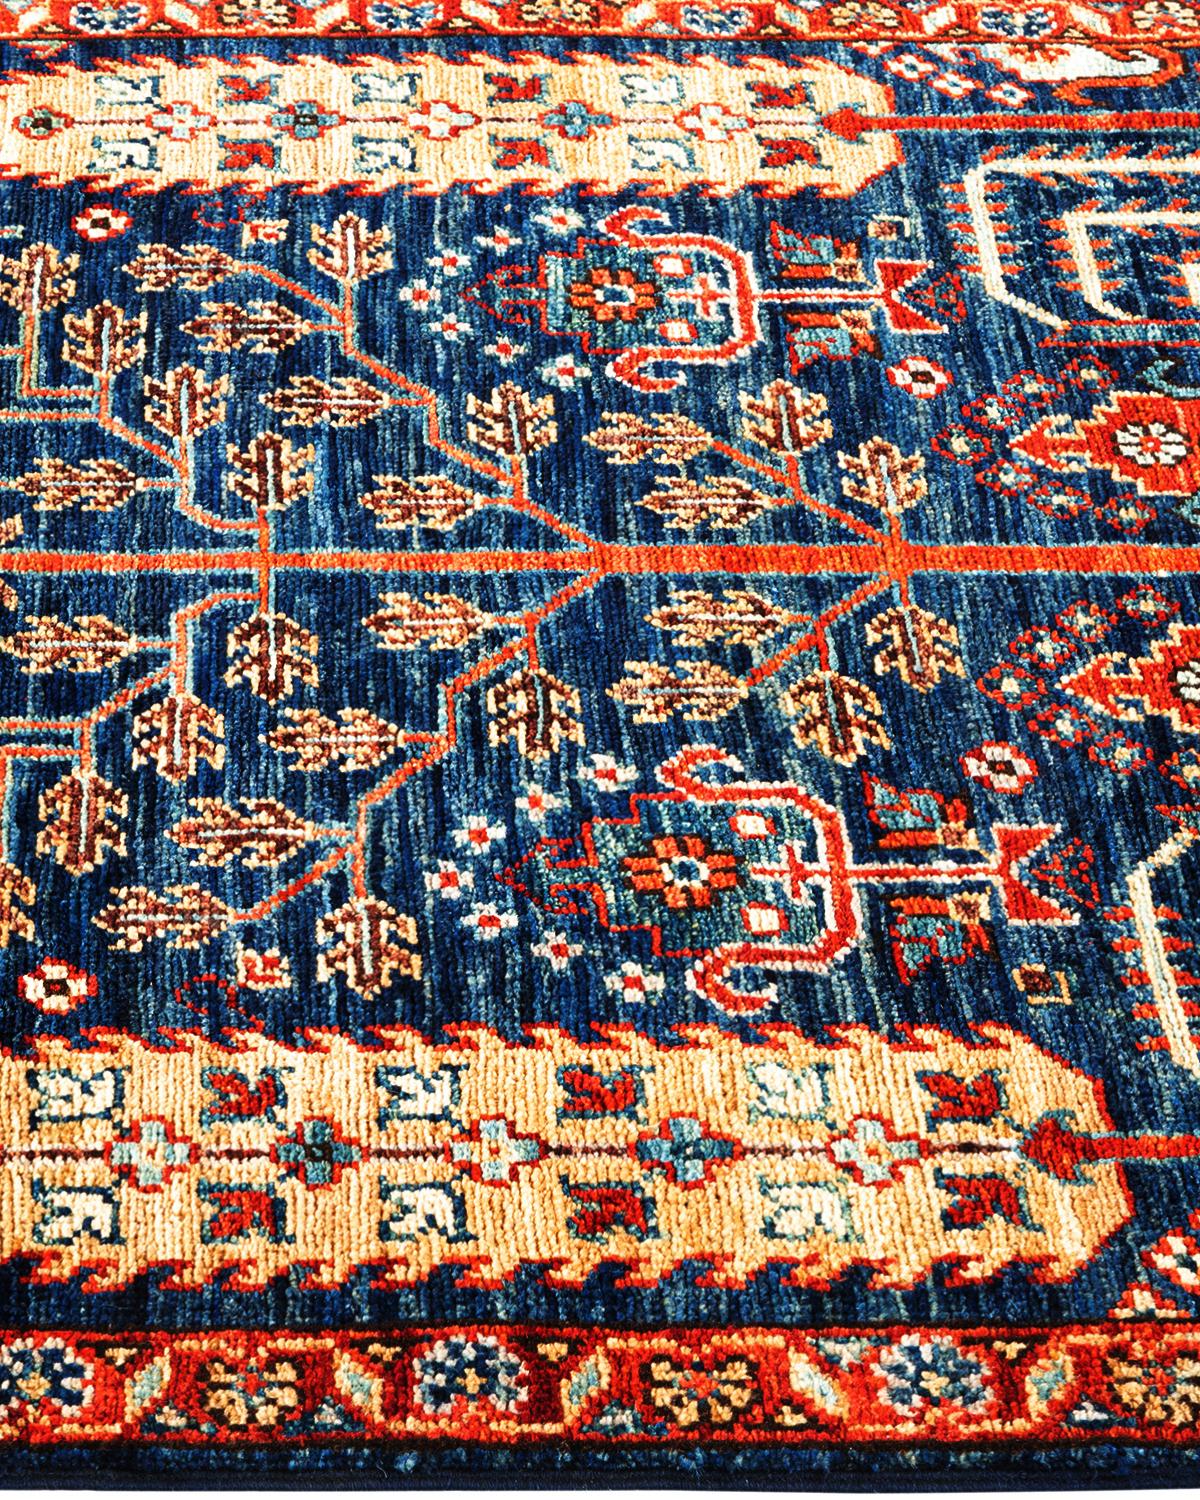 Wool Serapi, One-of-a-kind Hand-Knotted Runner Rug, Blue